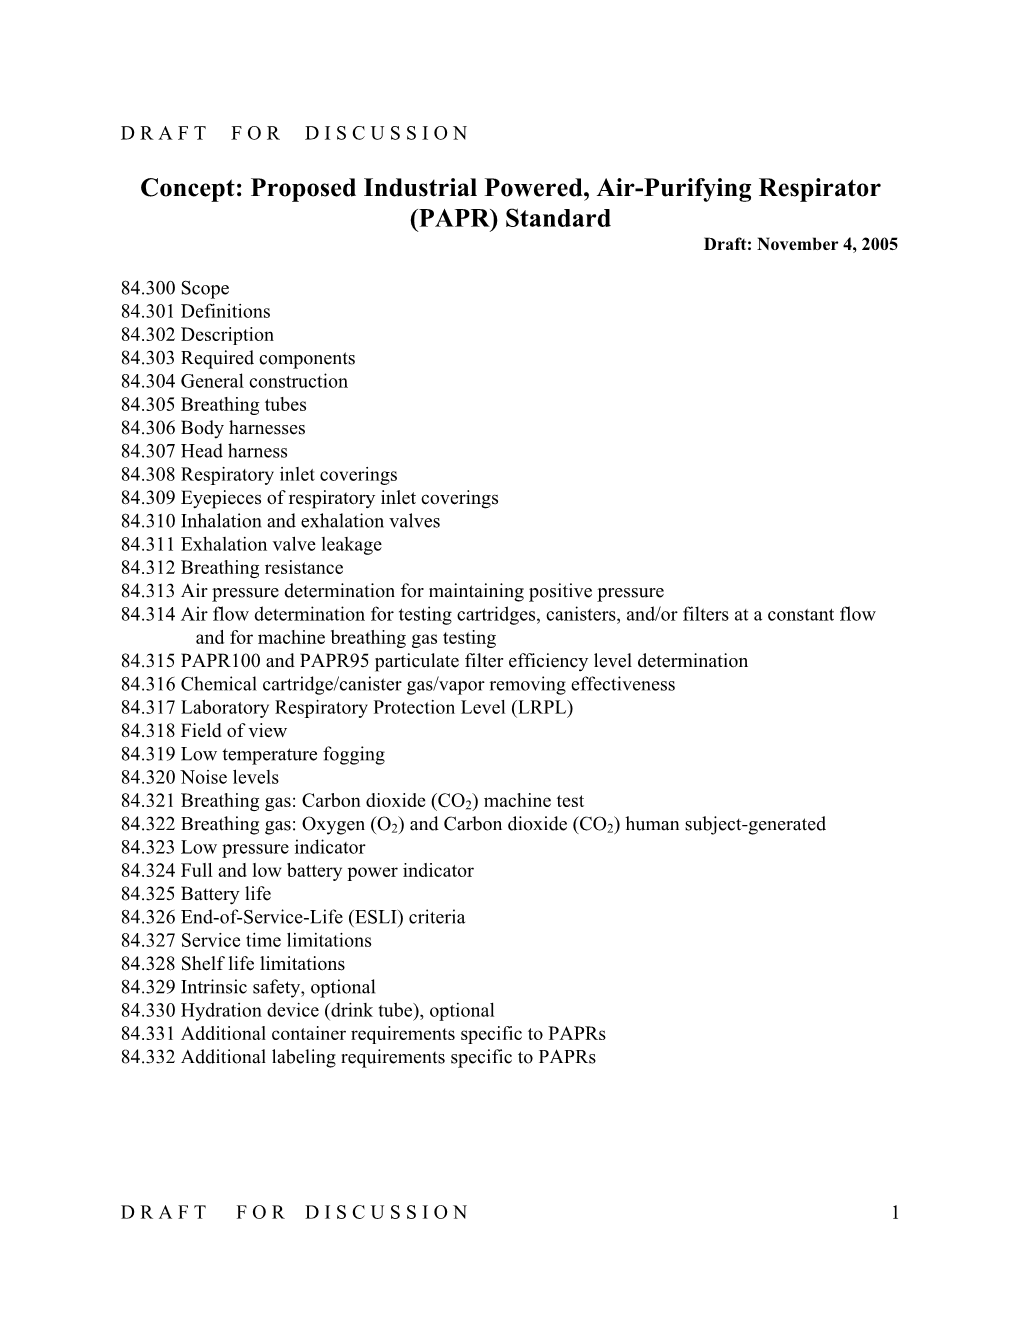 Proposed Industrial Powered, Air-Purifying Respirator (PAPR) Standard Draft: November 4, 2005